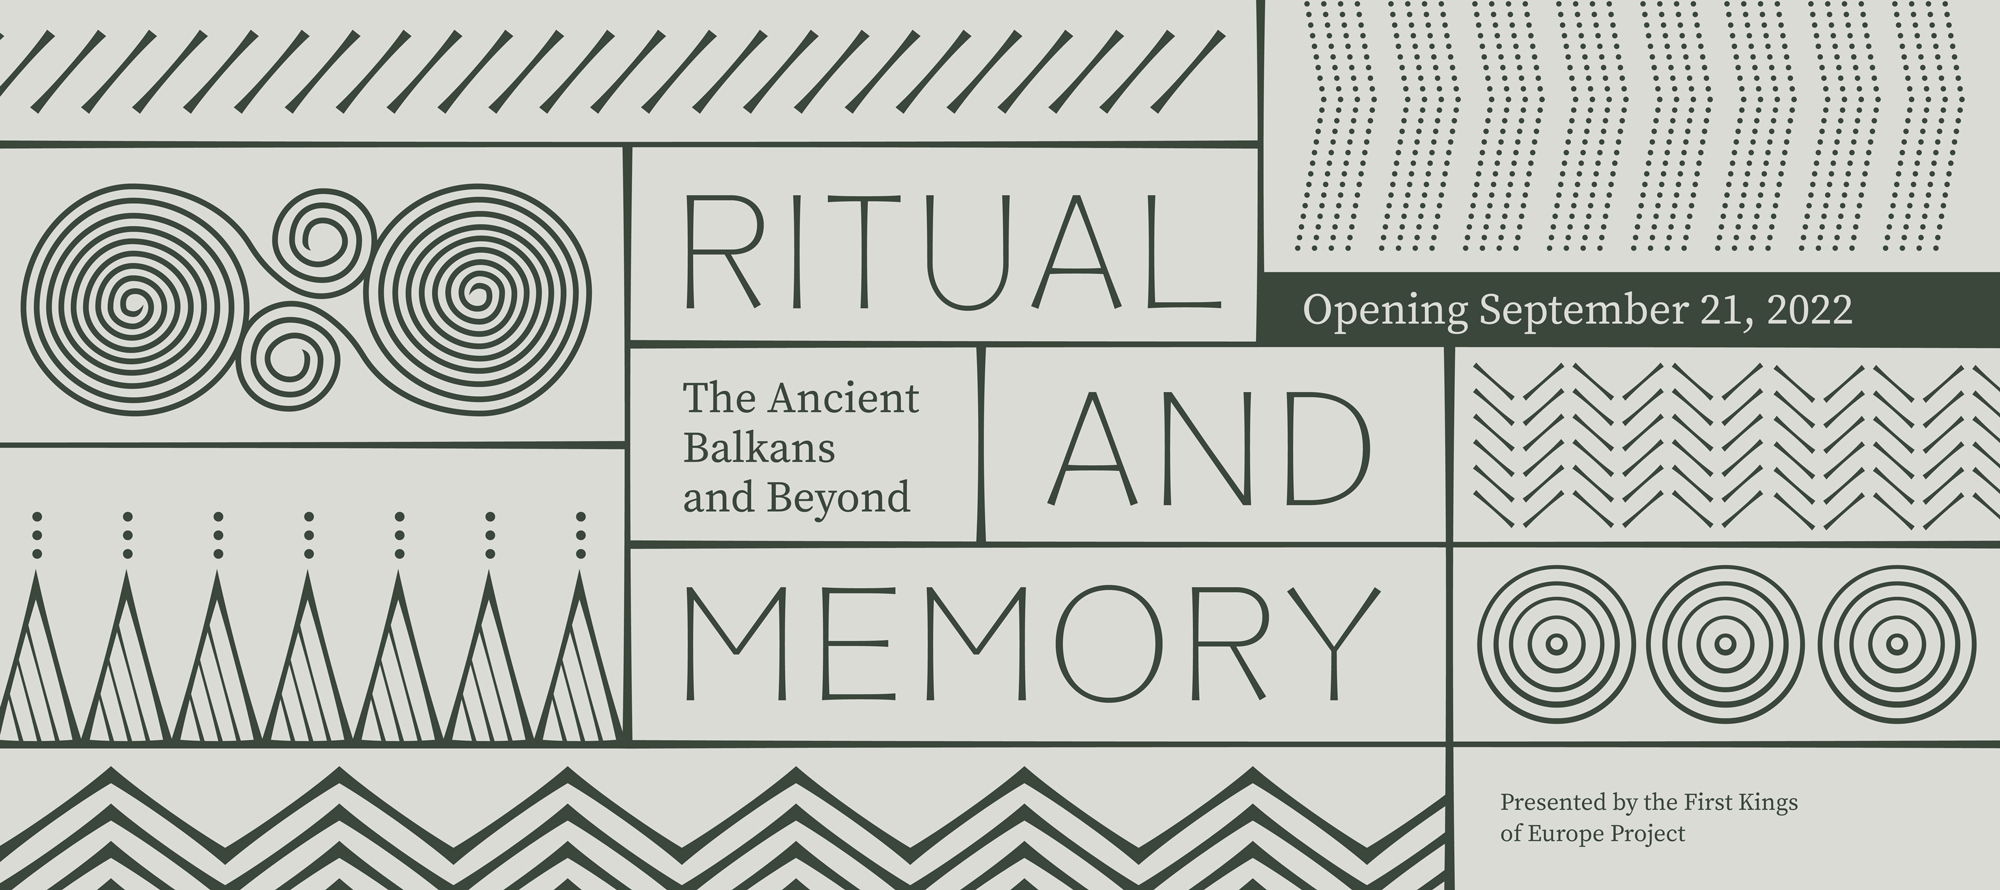 Ritual and Memory: The Ancient Balkans and Beyond. Opening September 21, 2022. Presnted by the First Kings of Europe Project